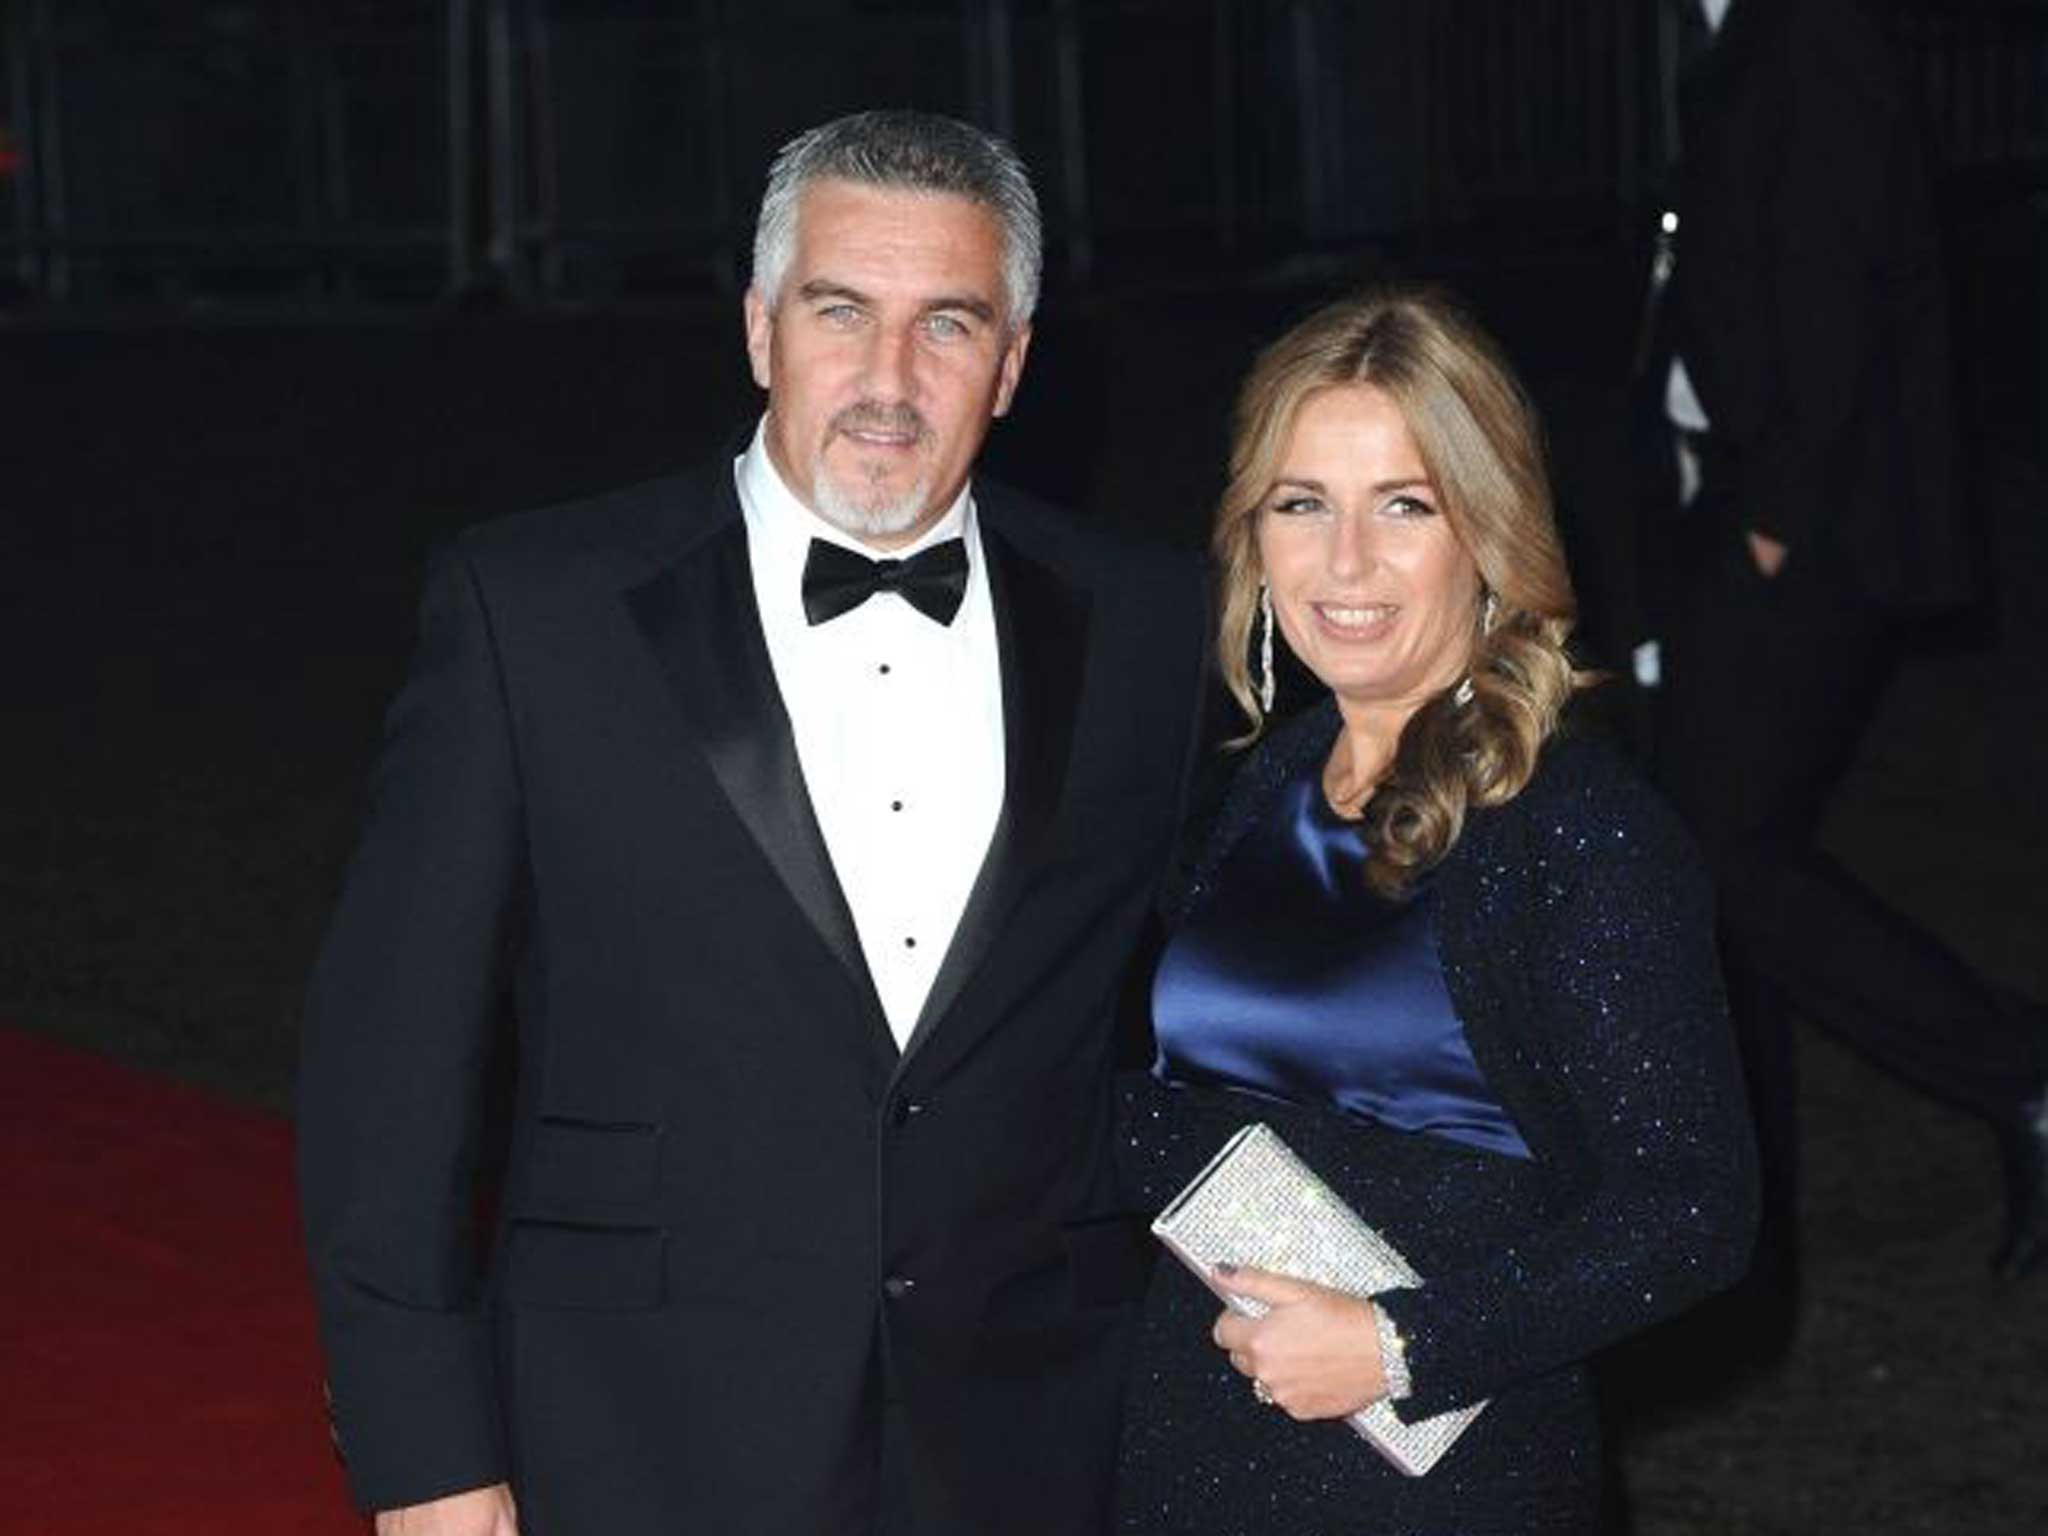 British Bake Off judge with his wife. She has now filed for divorce